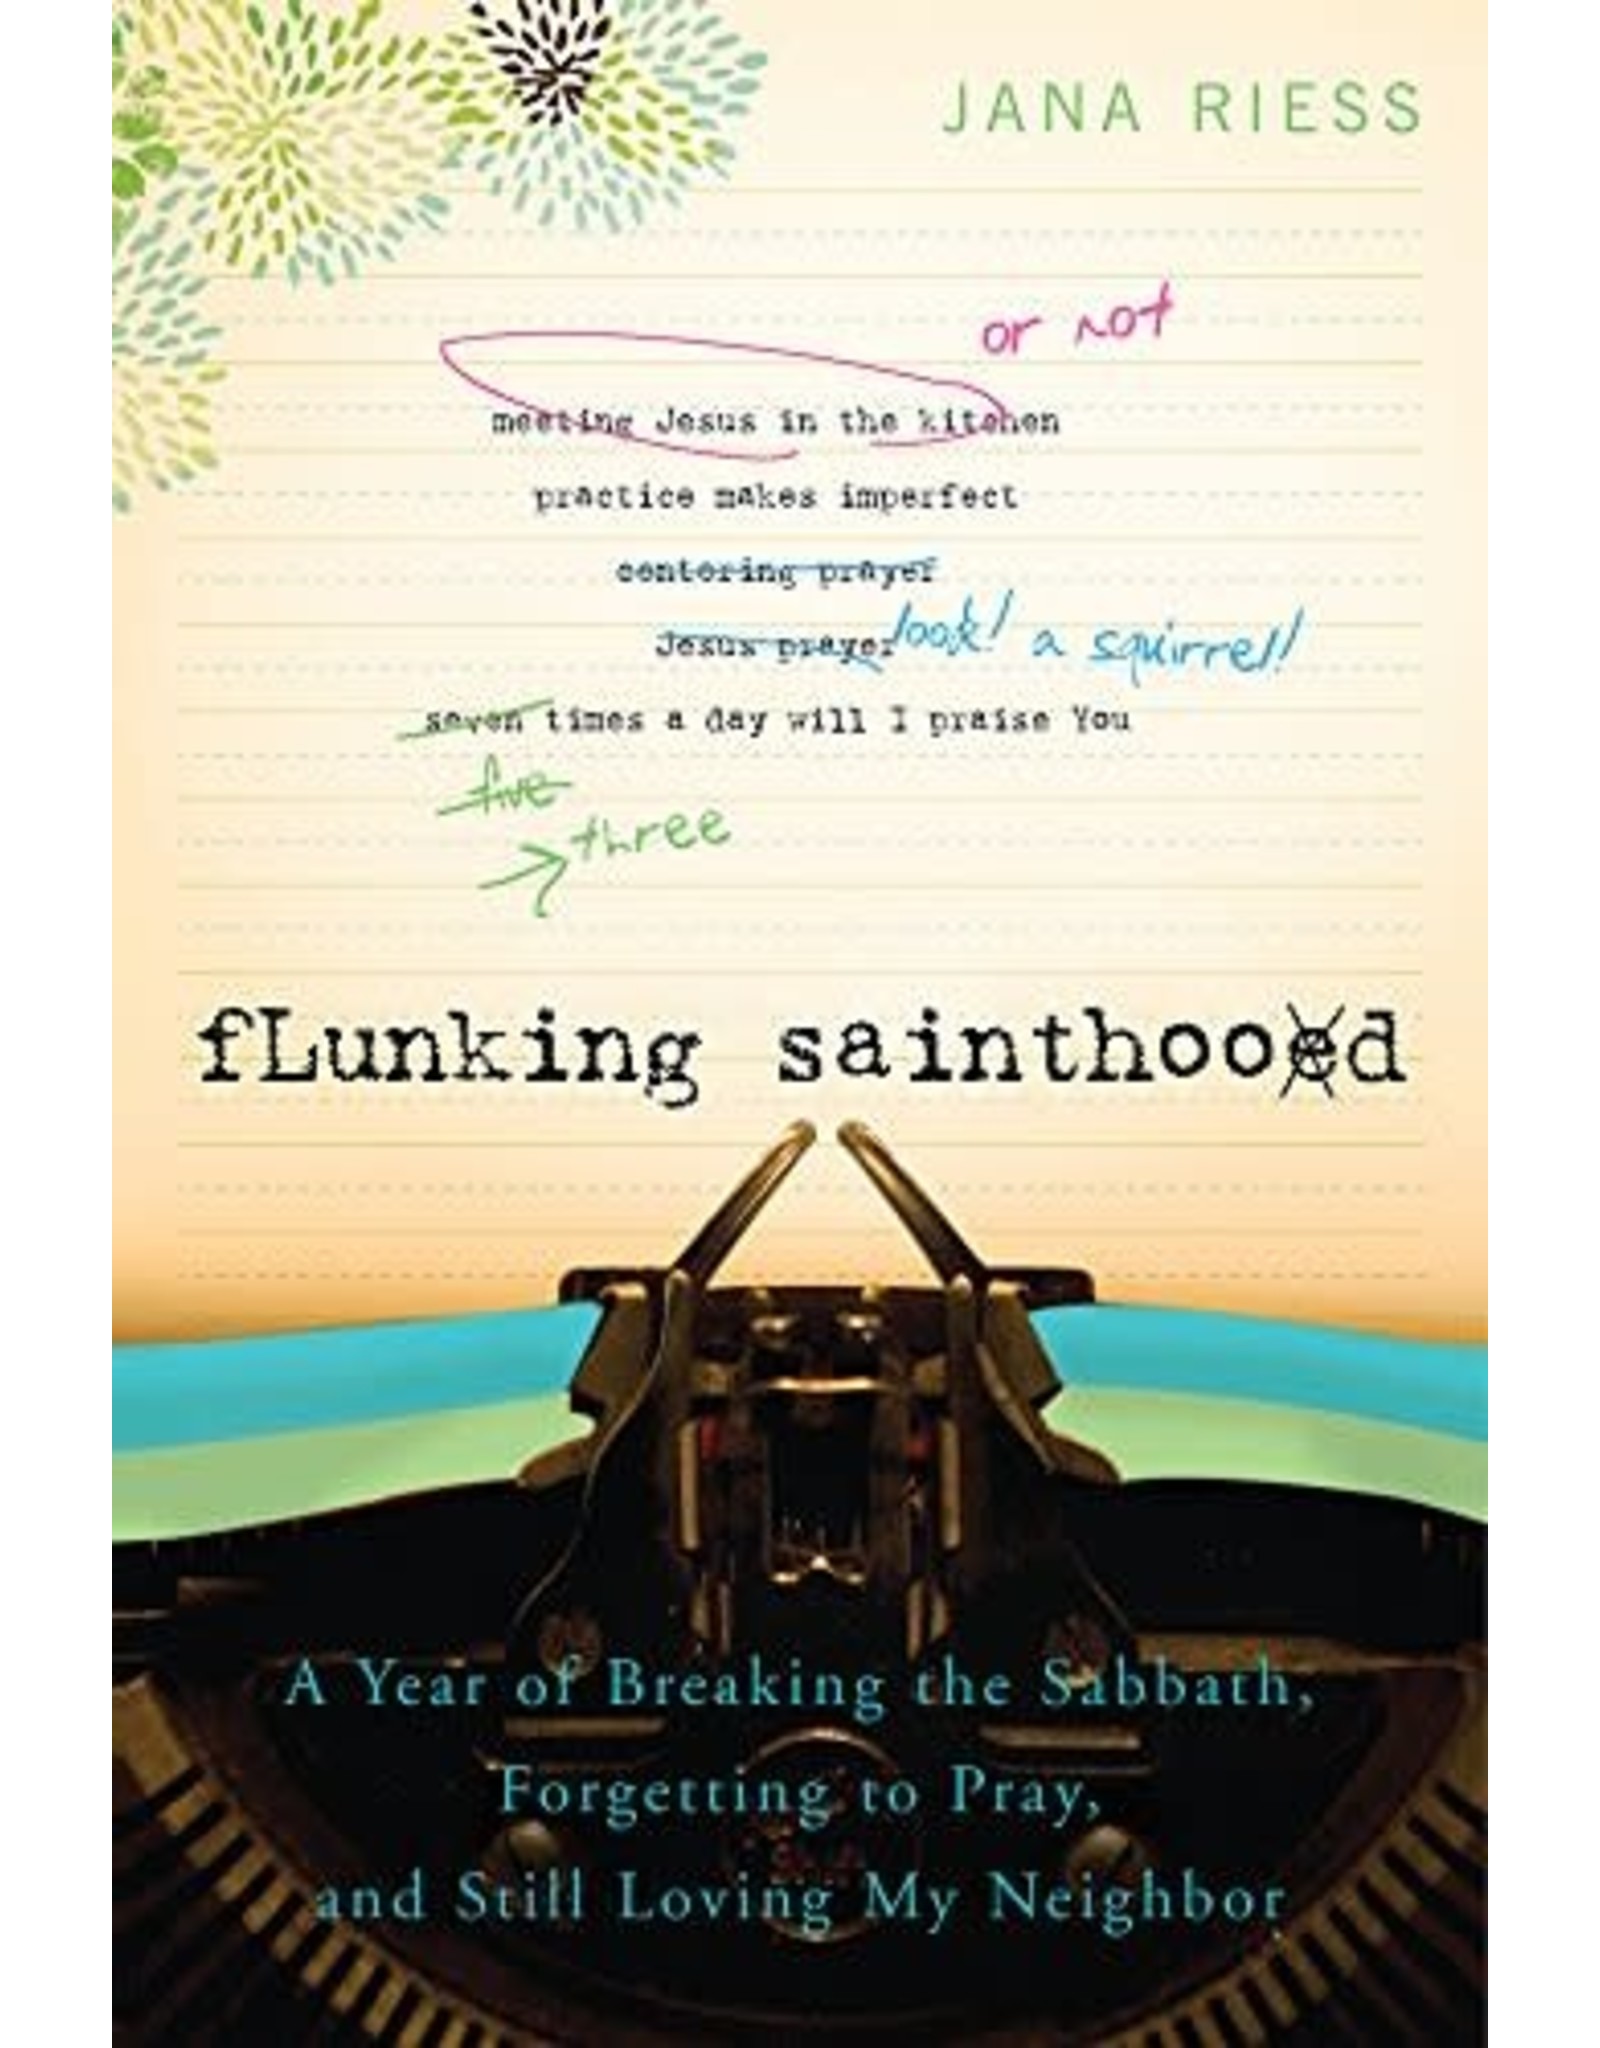 Paraclete Press Flunking Sainthood: A Year of Breaking the Sabbath, Forgetting to Pray, and Still Loving My Neighbor by Jana Riess (Paperback)